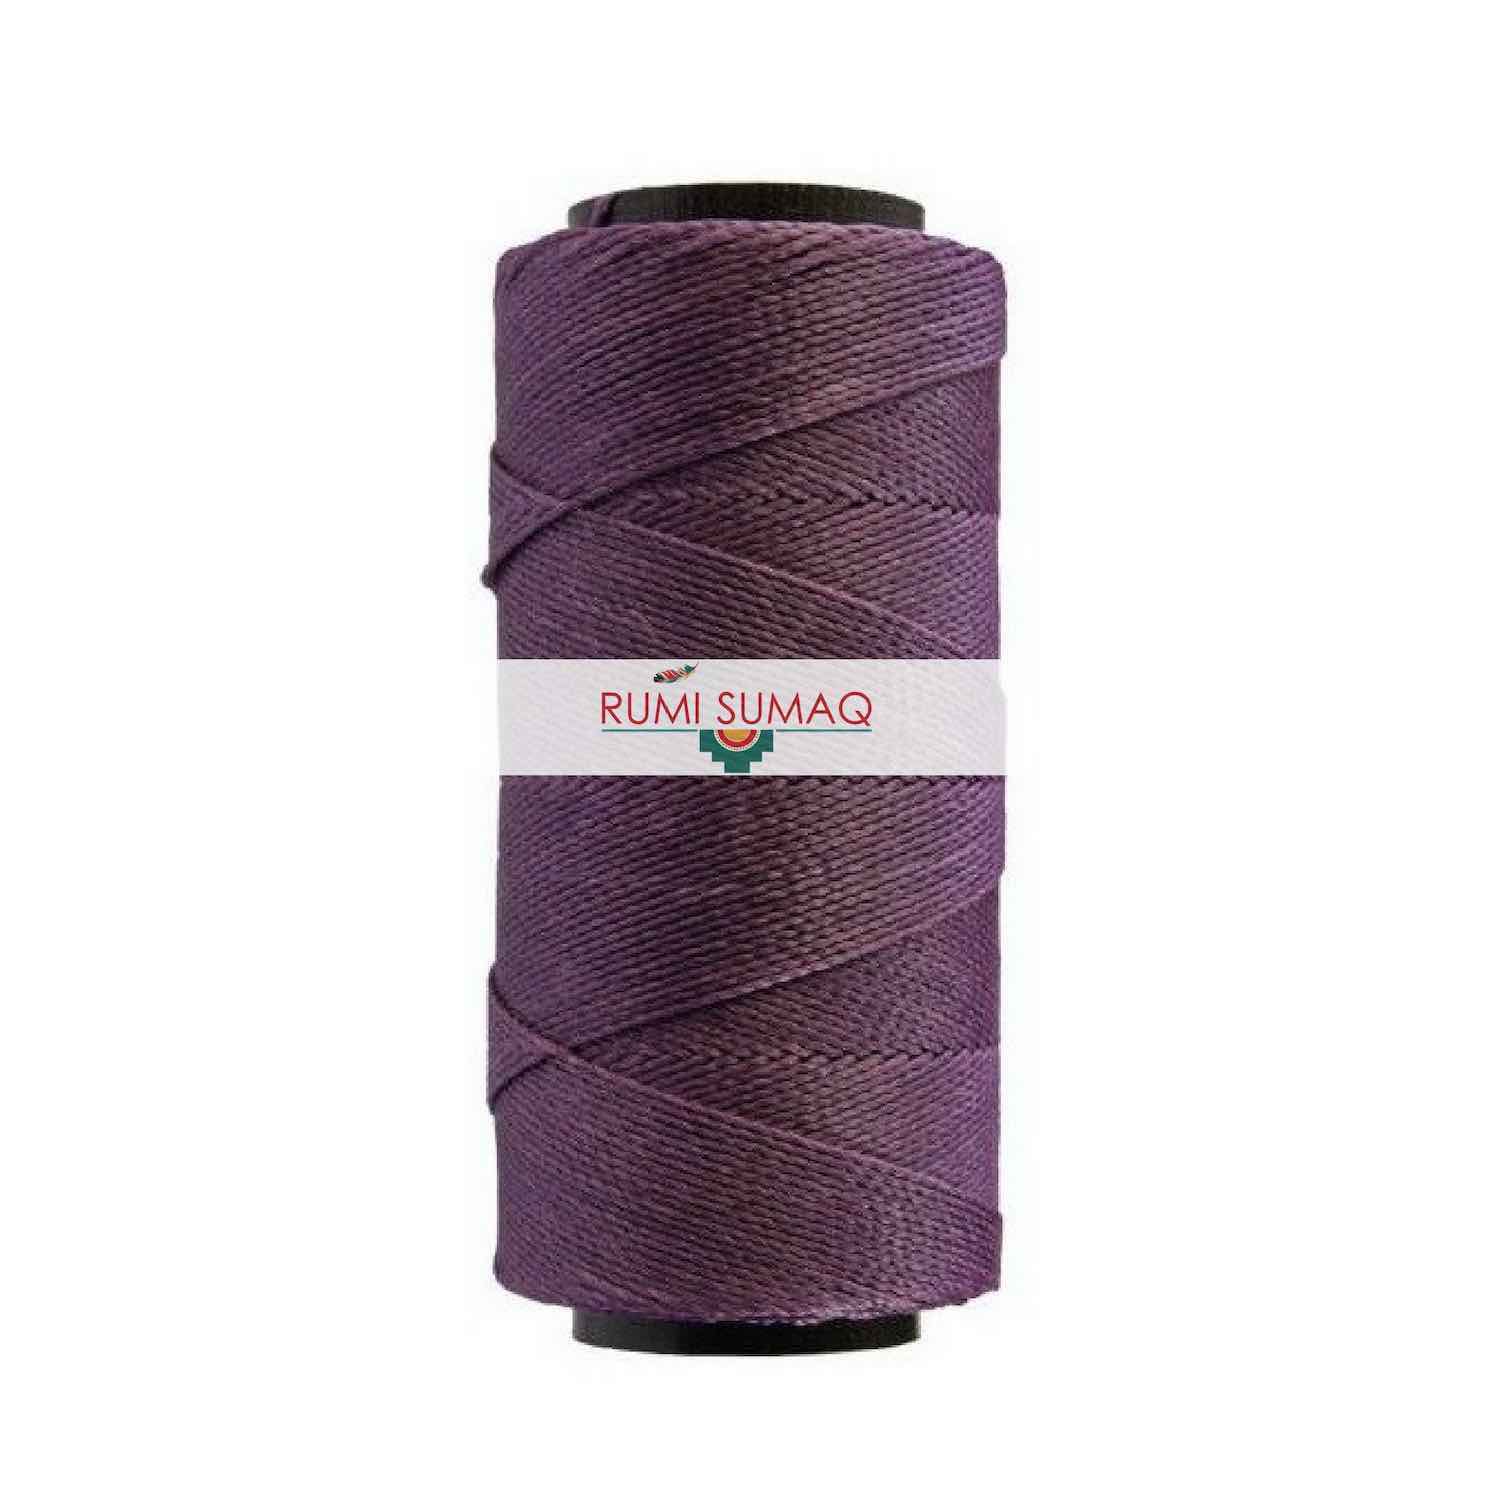 Settanyl 07-365 Burgundy Waxed Polyester Cord | RUMI SUMAQ Waxed Cord for Macrame, Knotting, Beading, Basket Weaving, Leather Working, Hand Stitching, Quilting and Jewelry Making